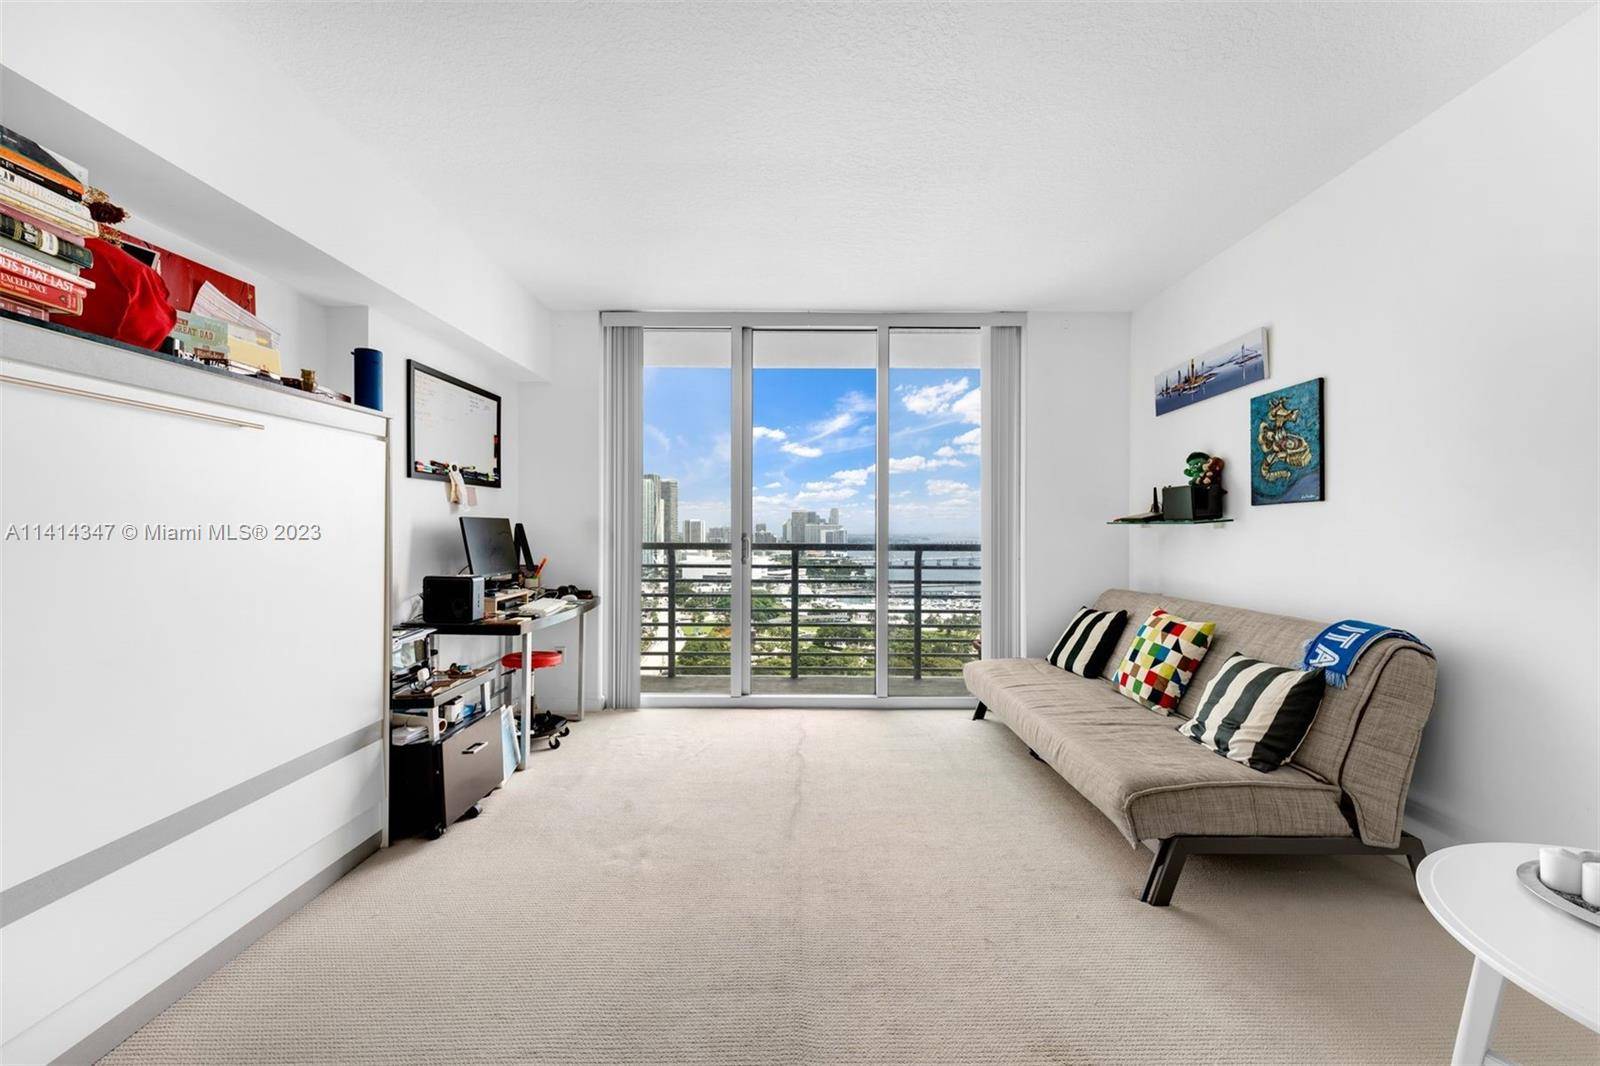 A beautiful studio at One Miami West with 507 interior square feet, a balcony, granite countertops, stainless steel kitchen appliances, in unit washer dryer, walk in closet, and floor to ...